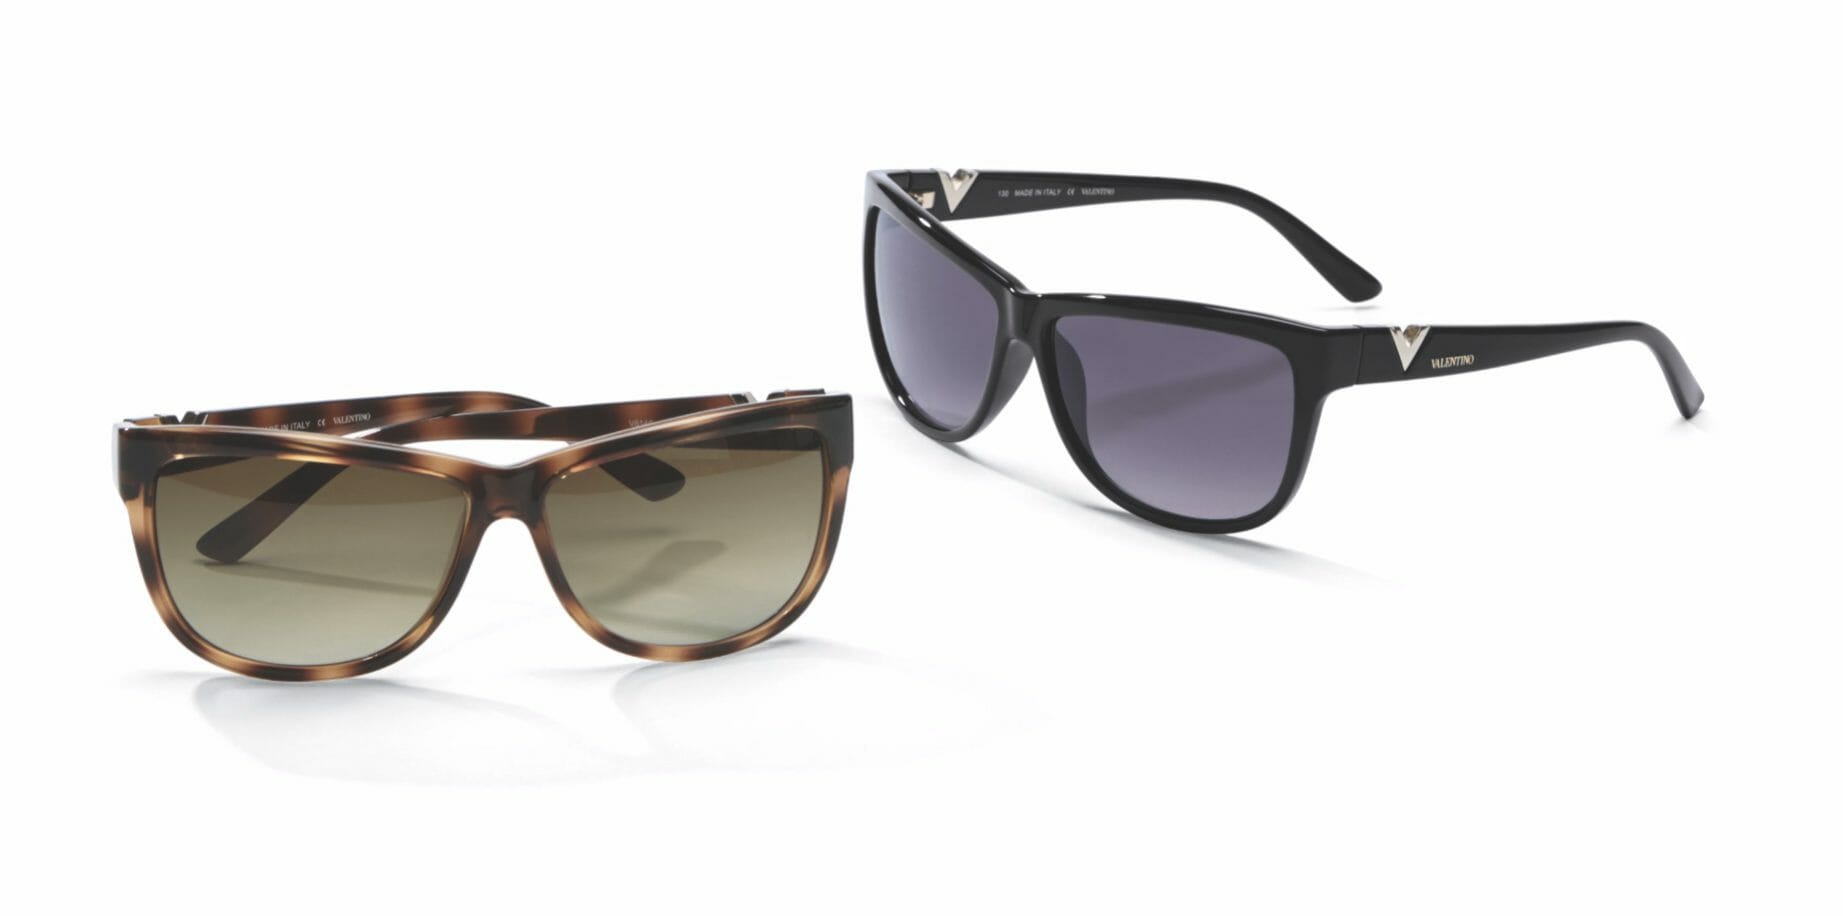 Two pairs of sunglasses, on in a brown tortoise shell frame and one in a black frame.